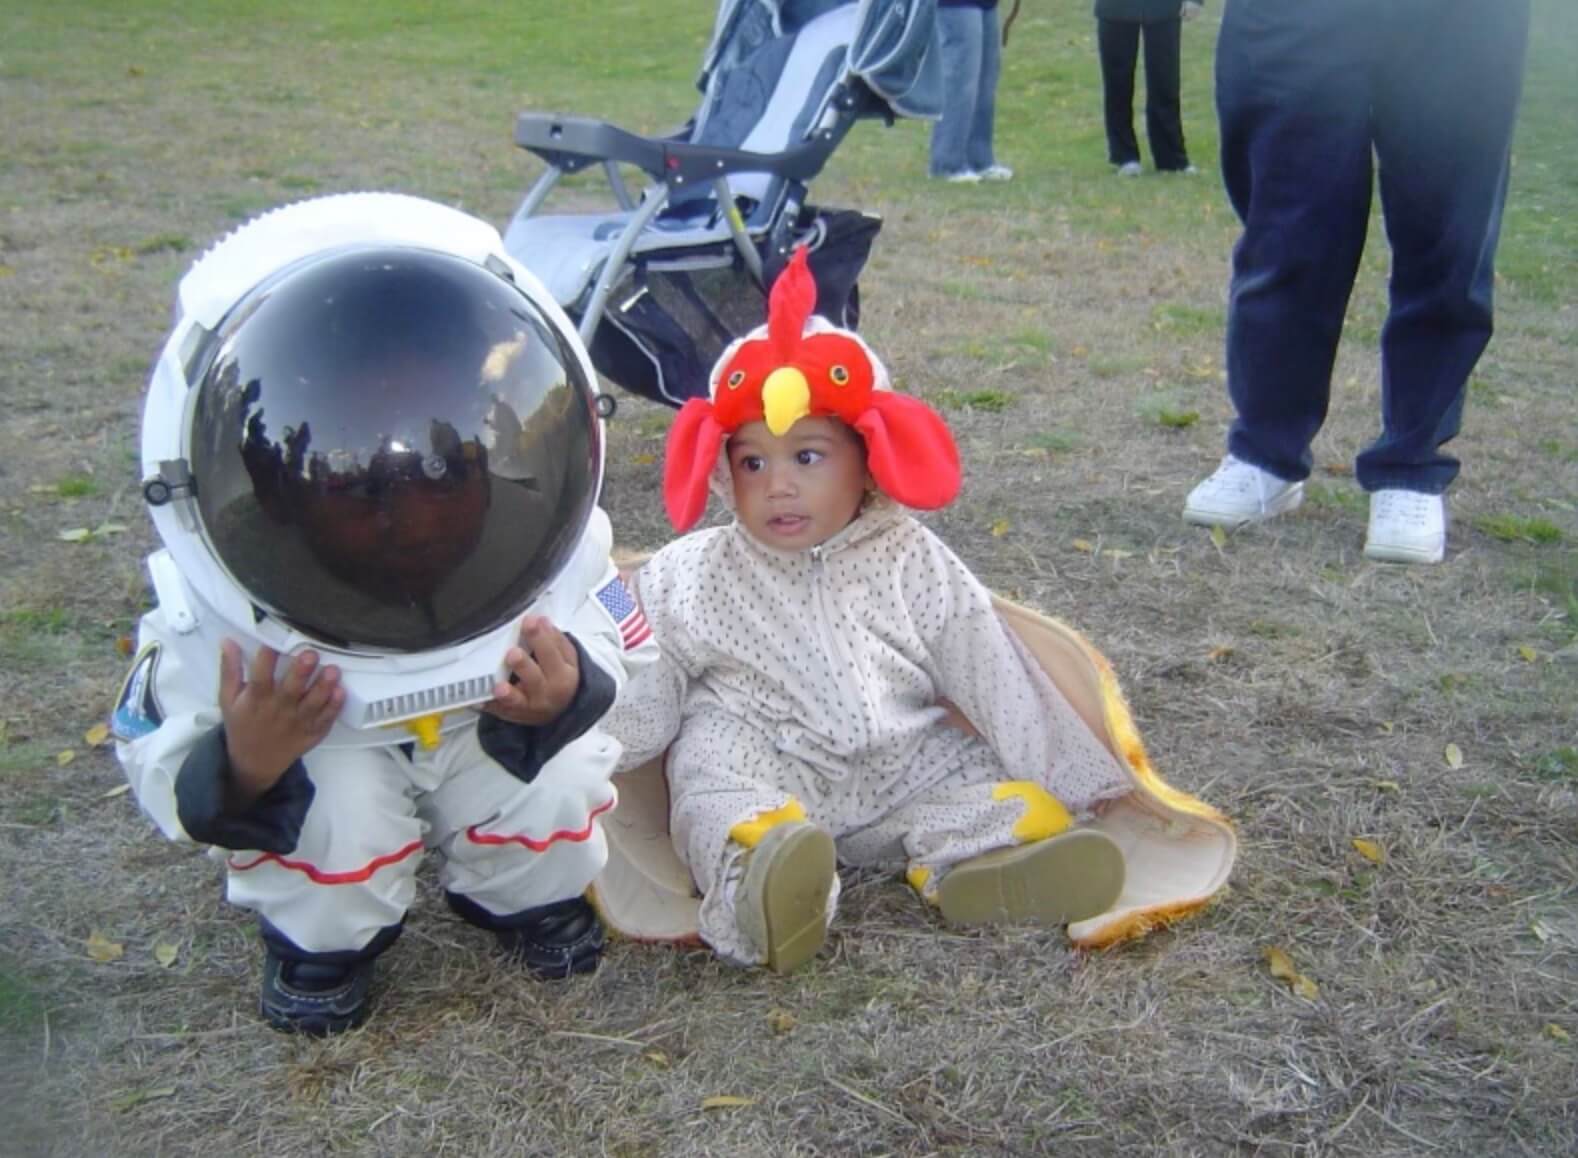 "When I was younger, I wanted to be an astronaut."